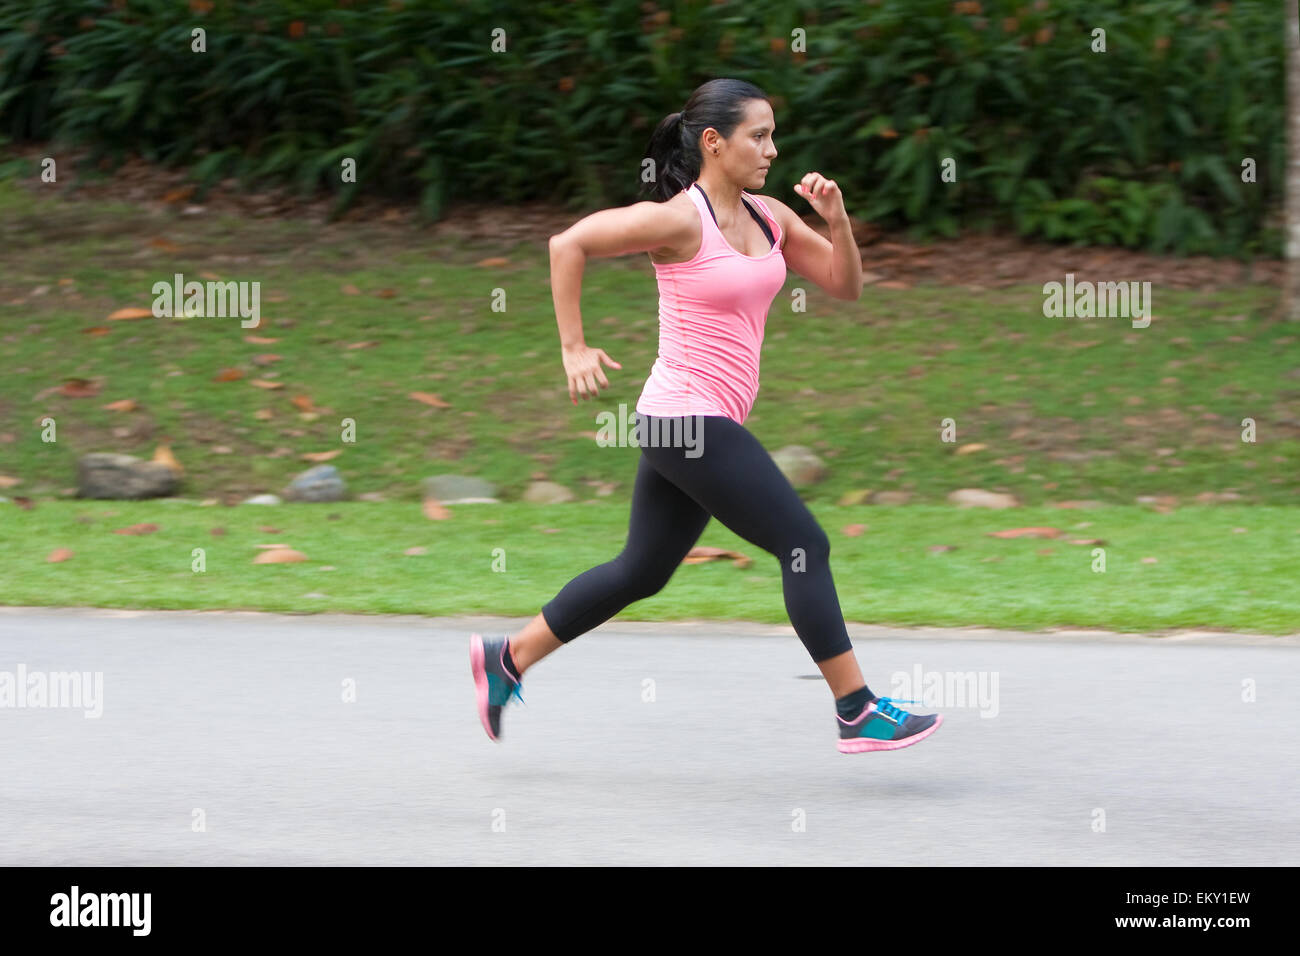 Young hispanic woman doing sprinting exercise in park Stock Photo